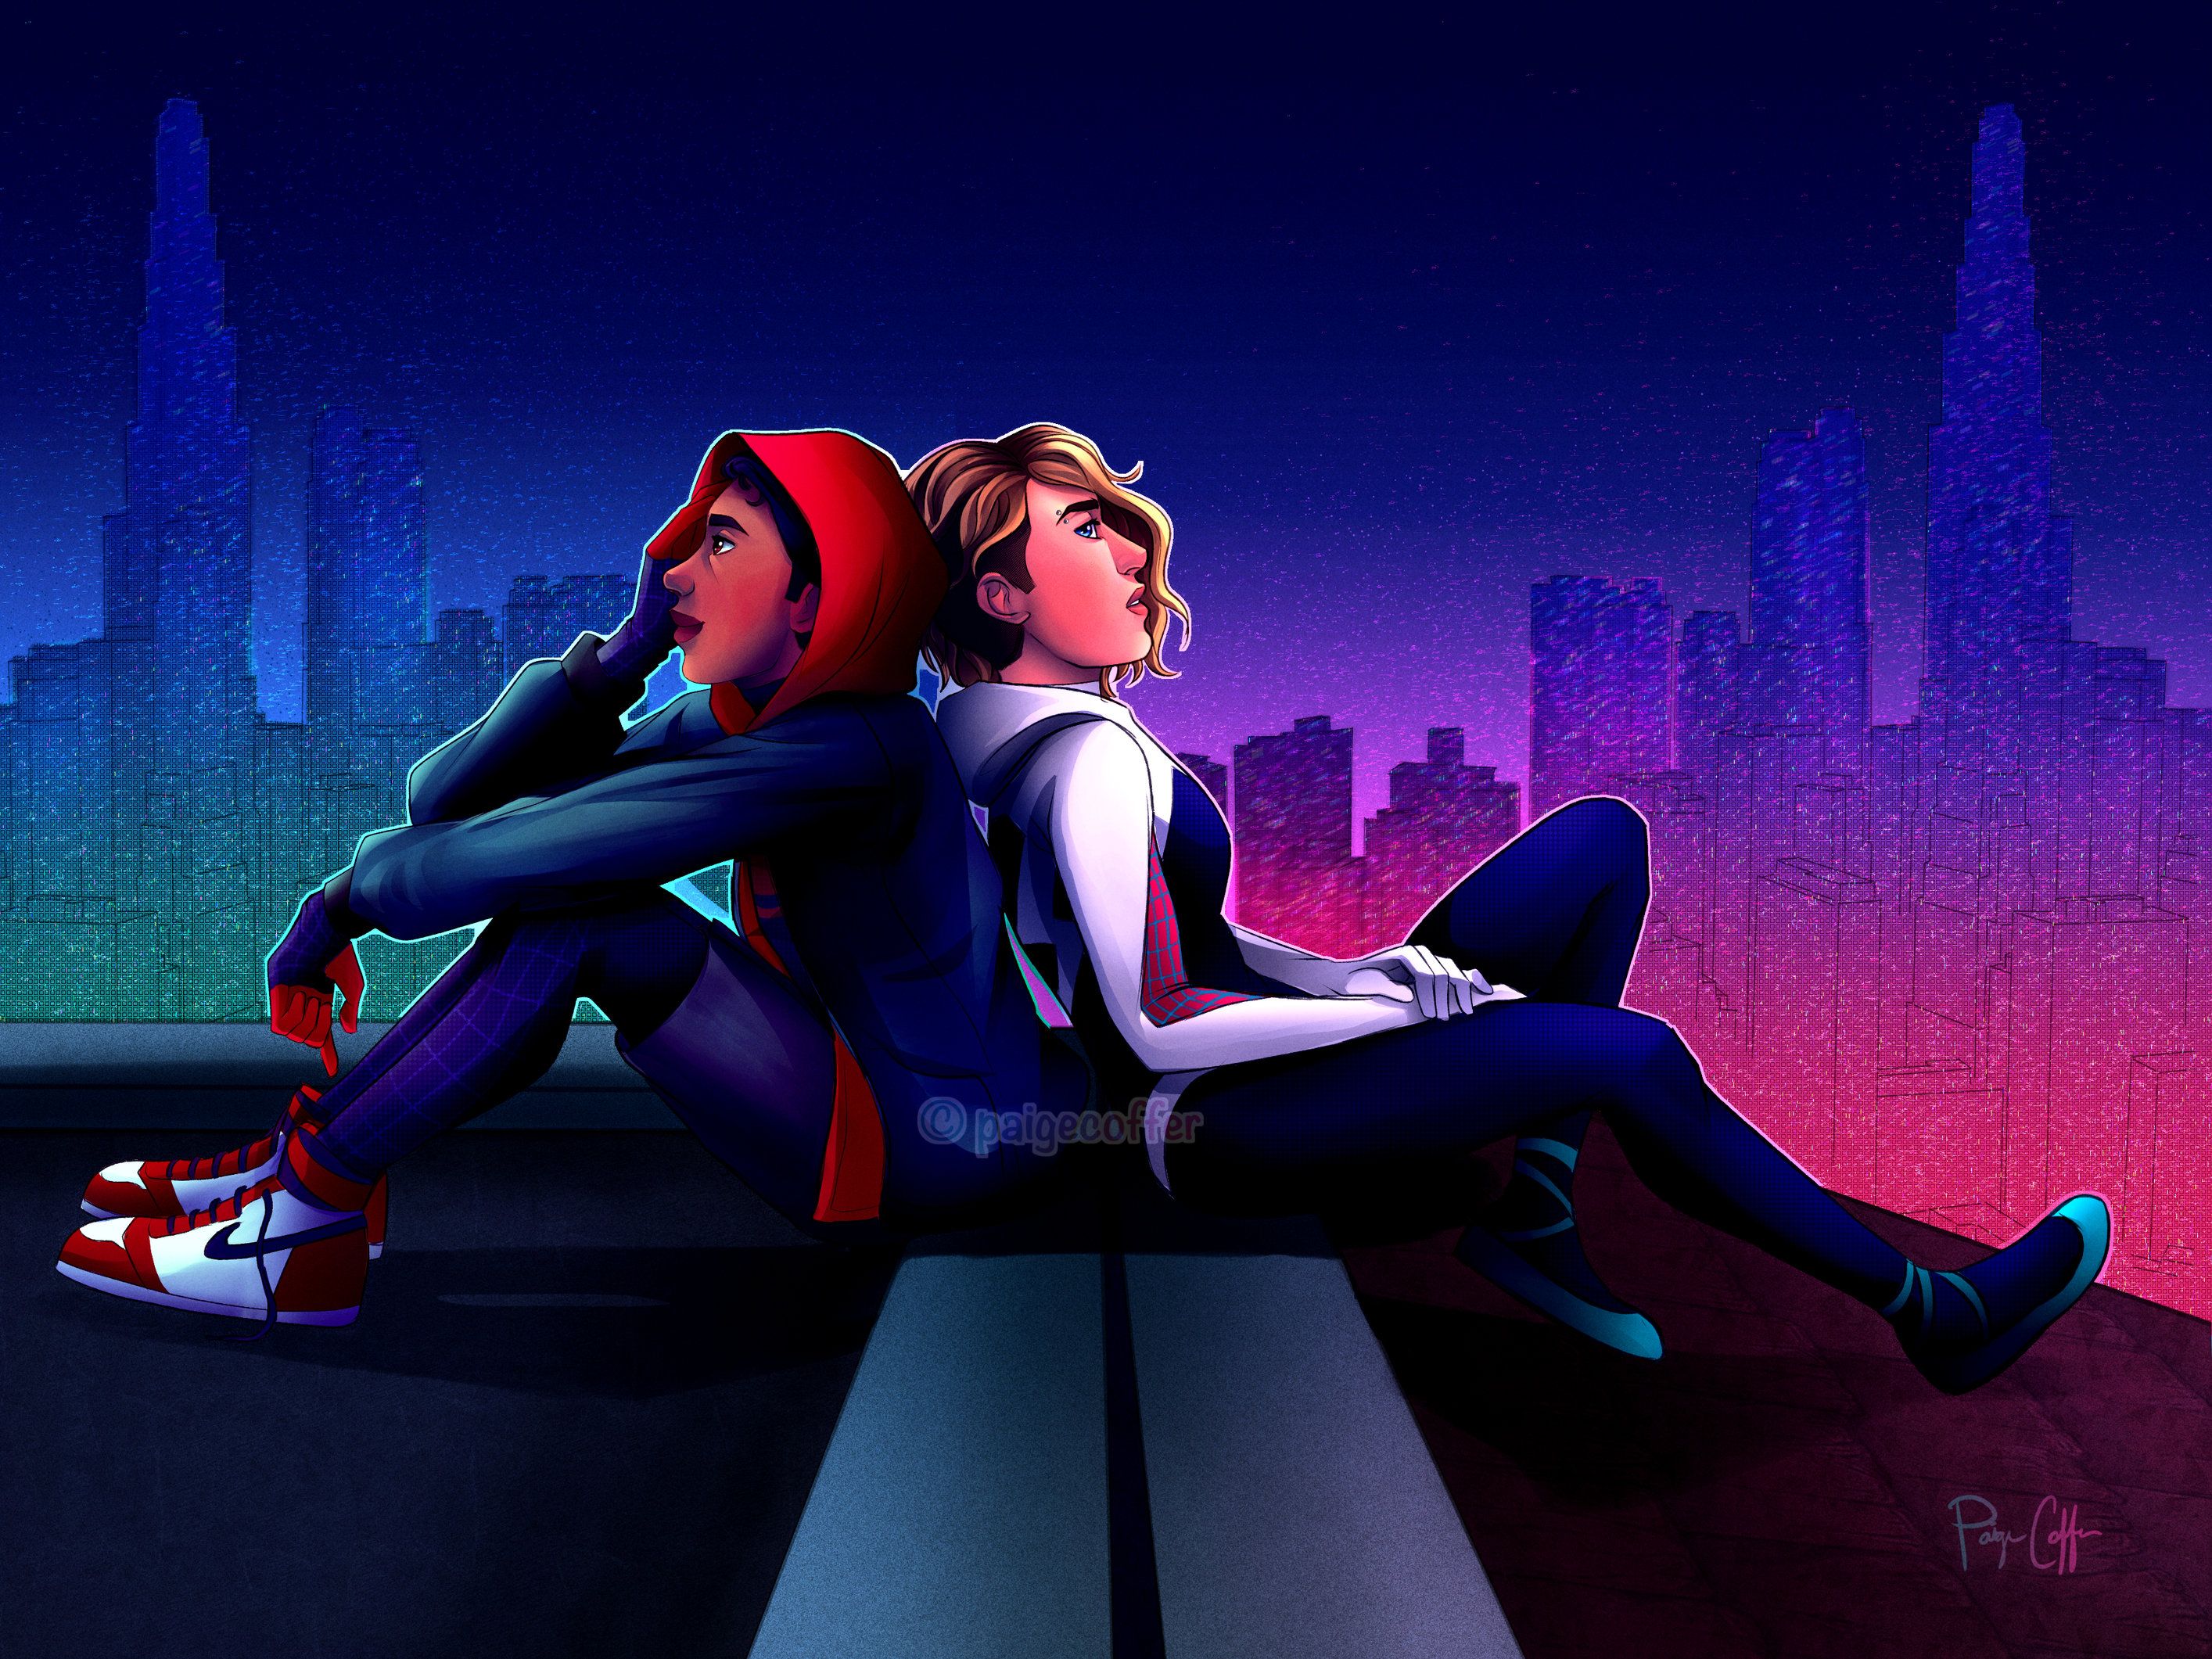 Miles and gwen art